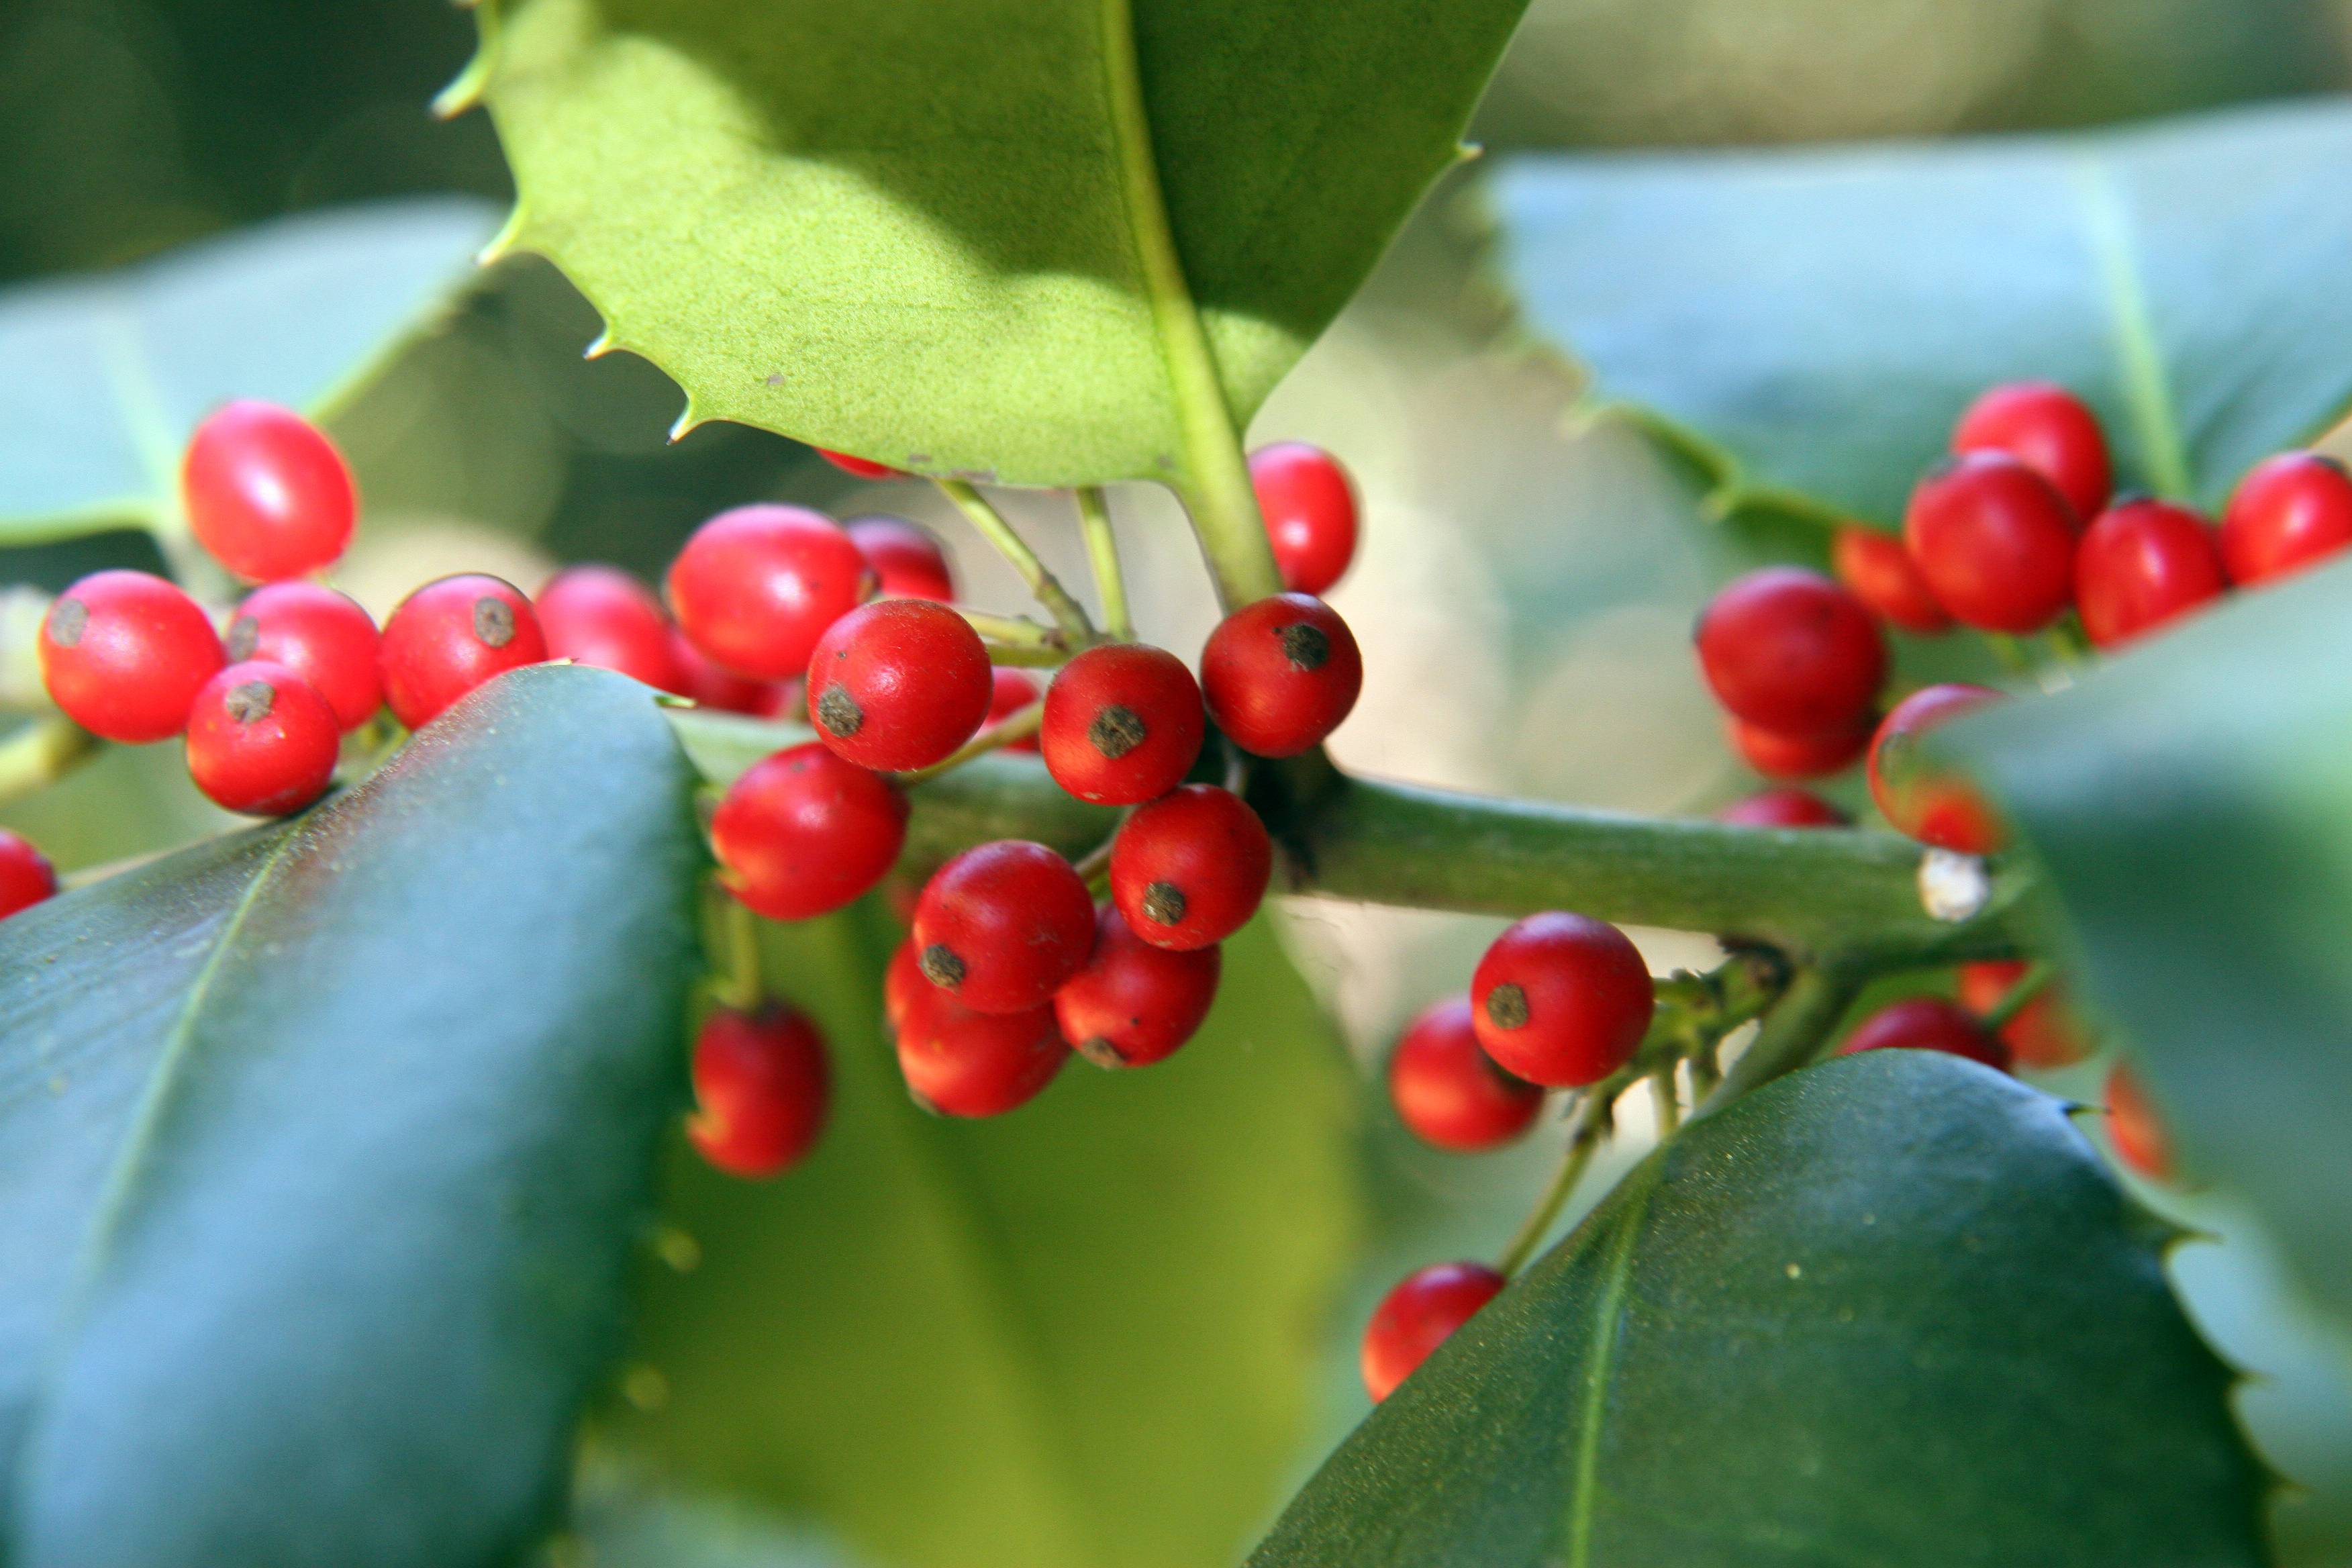 small, red berries, green leaves with thorny edges and green stems
